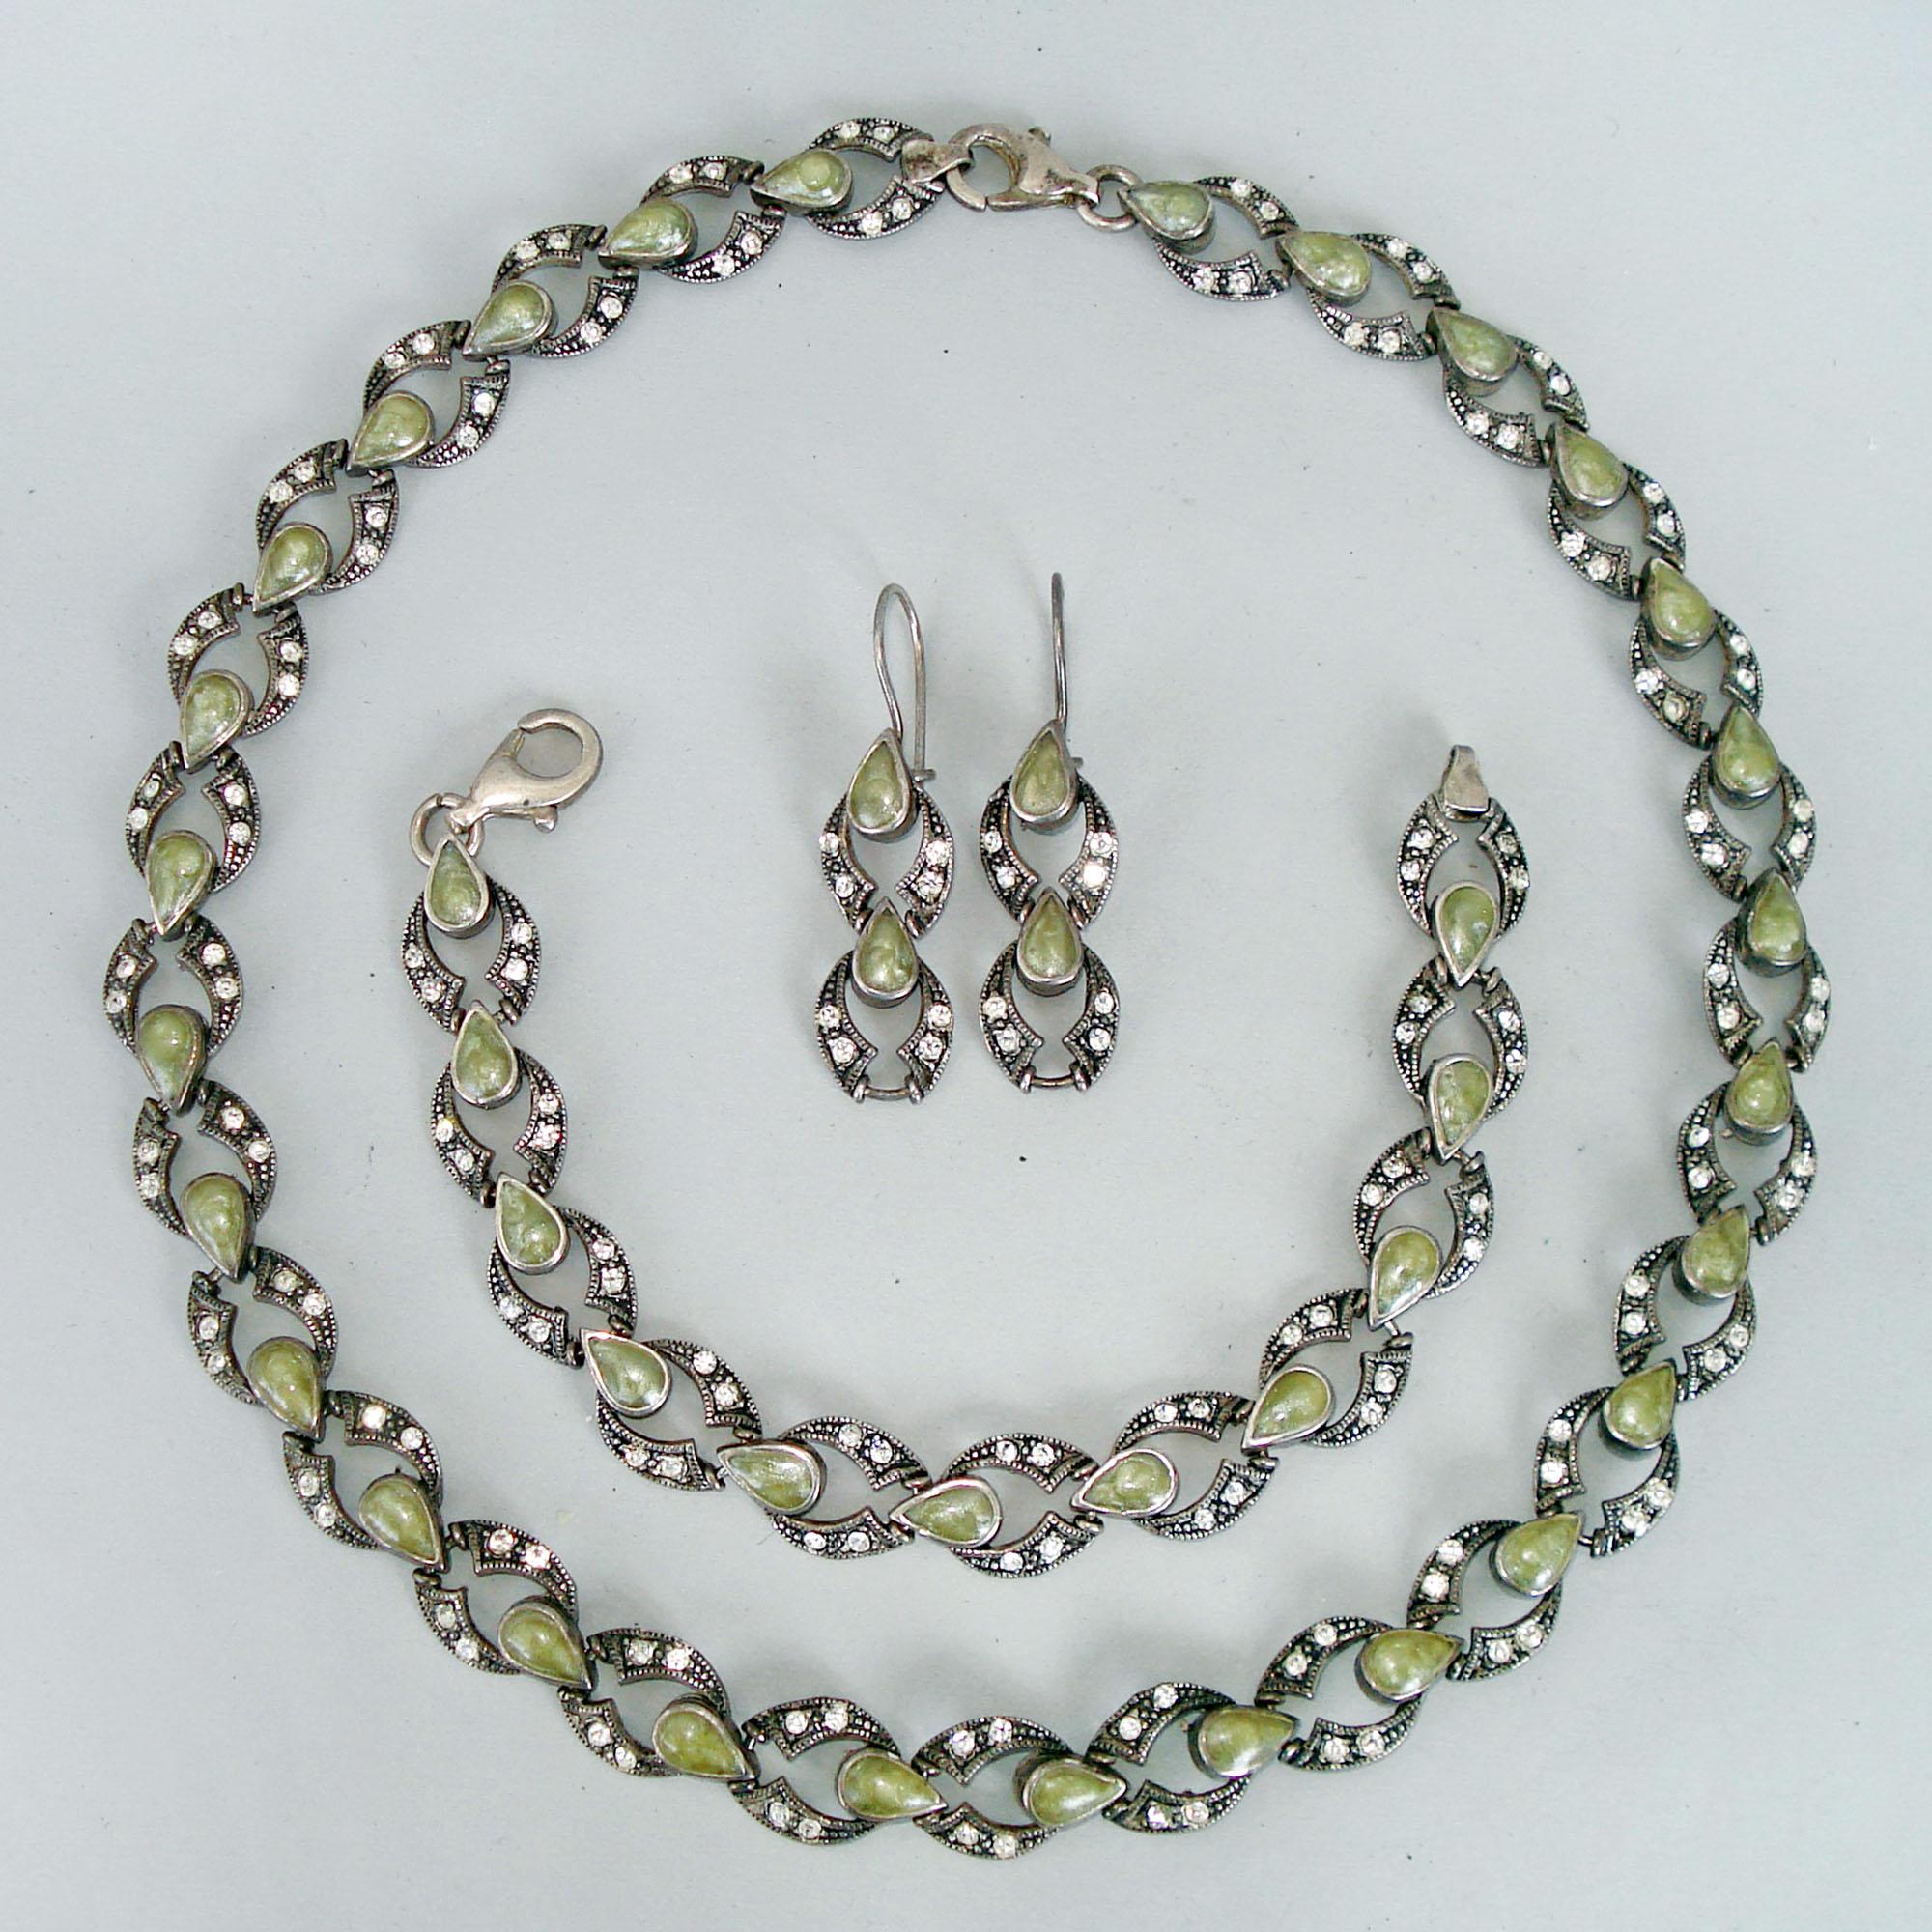 Late 20th Century Vintage Silver and Marcasite Jewelry Set Necklace, Bracelet and Earrings, 1980s